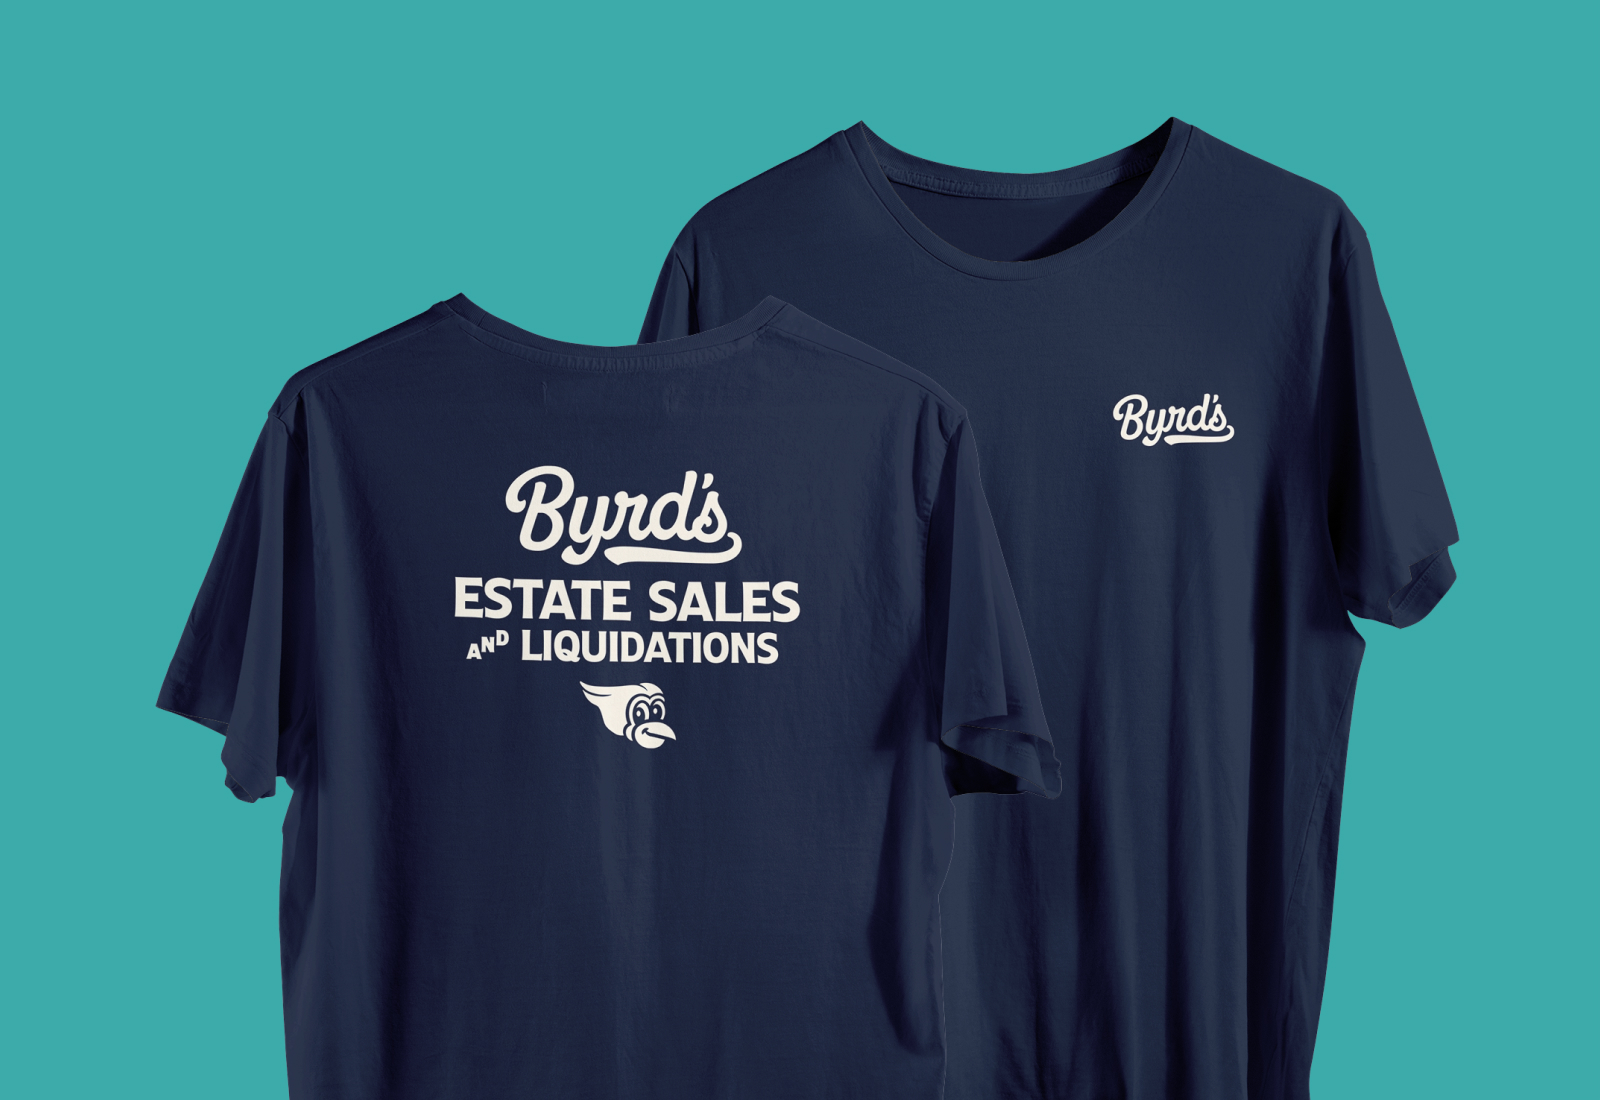 Front and Back Shirt Designs | Byrd's Estate Sales and Liquidations | Brand Identity by Joey Carty